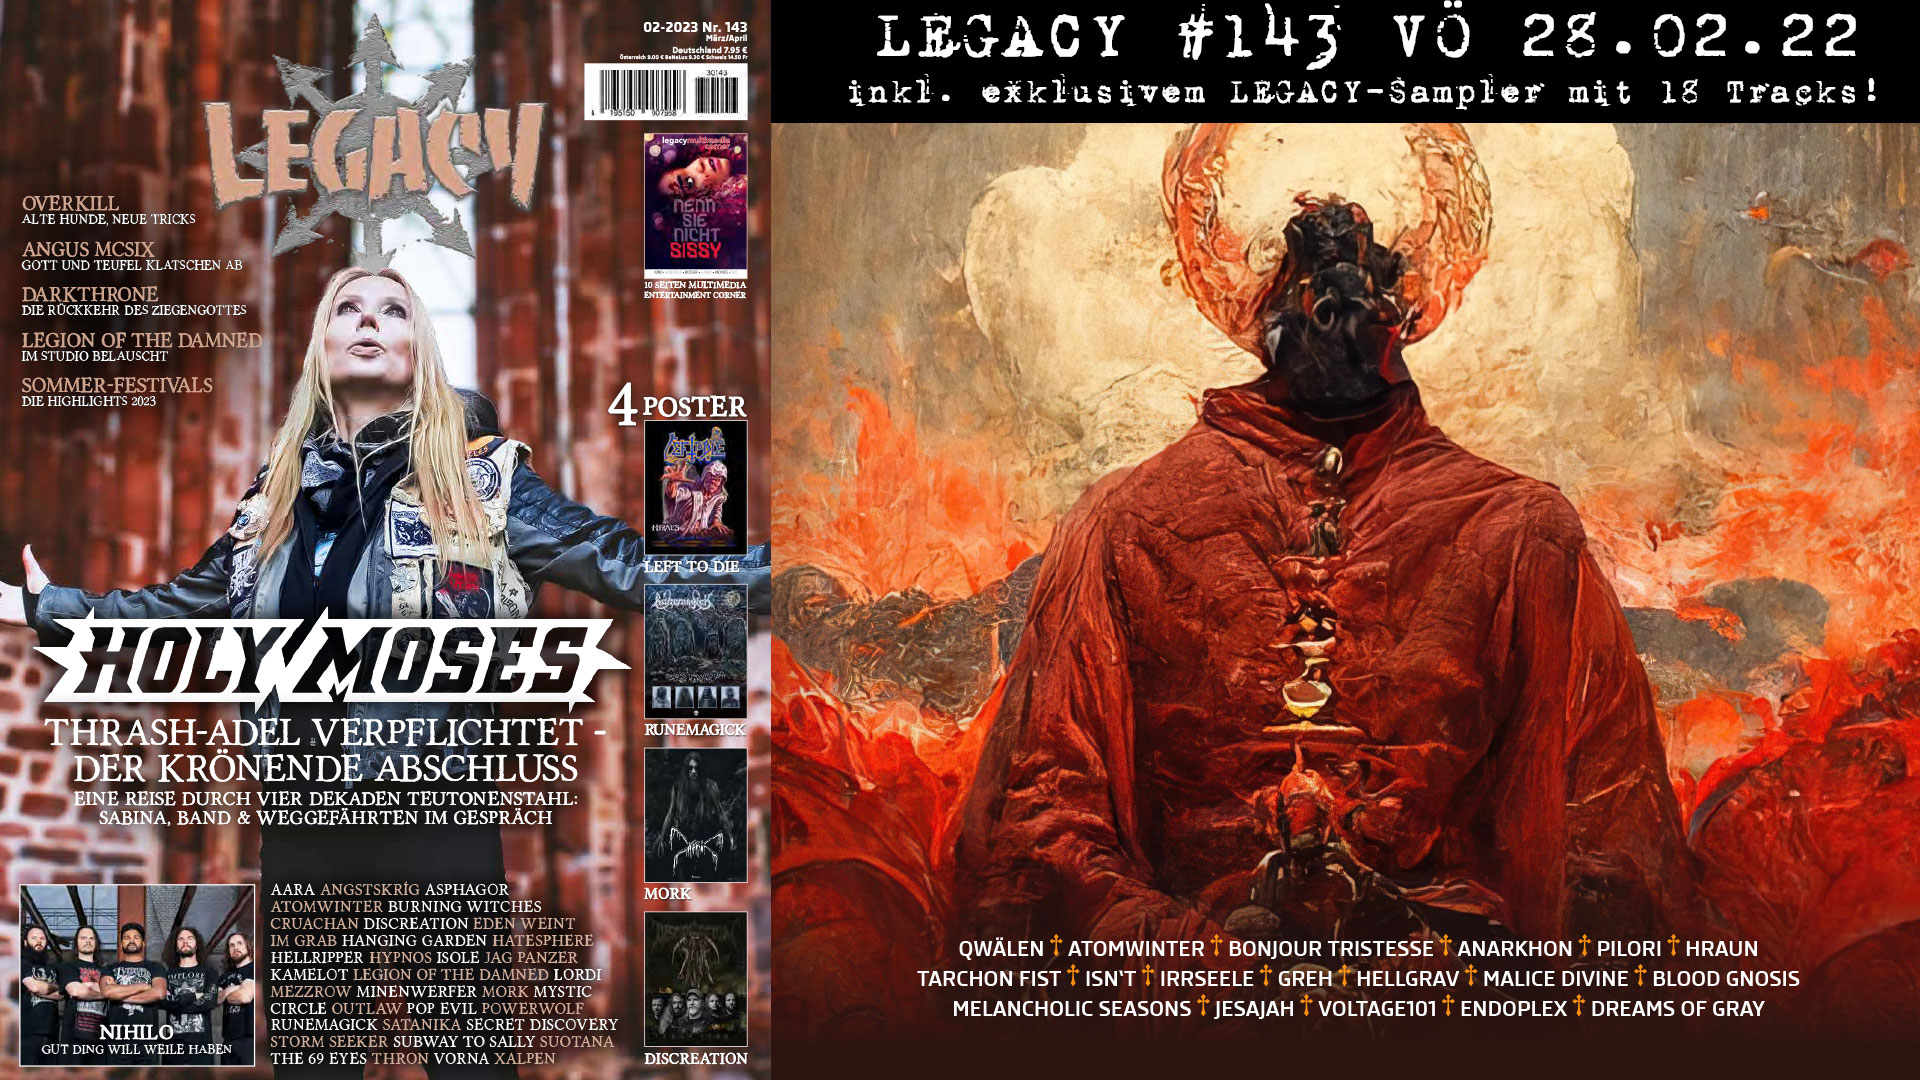 LEGACY #143 out 28.02.2023